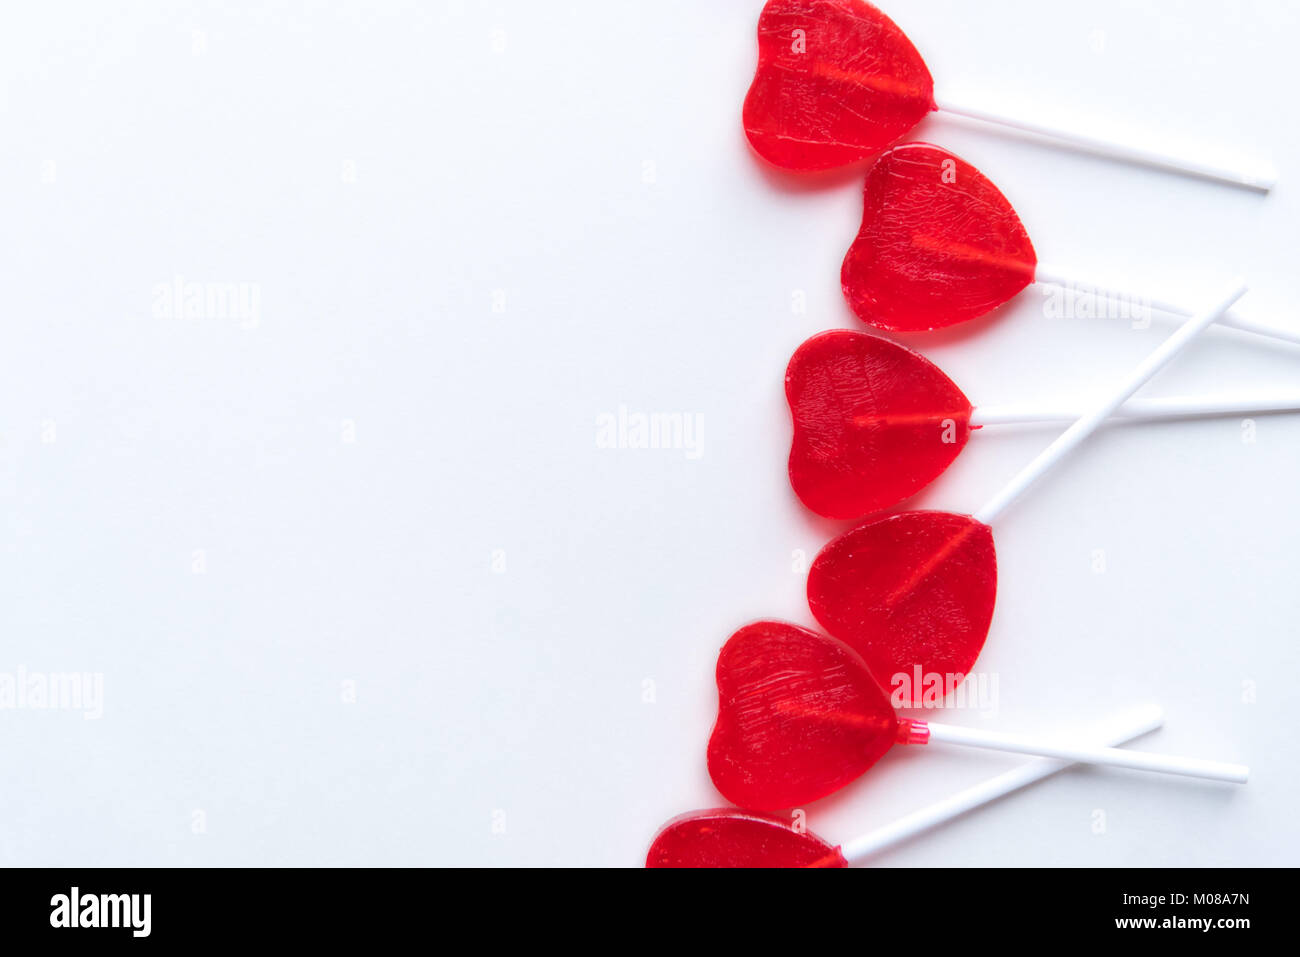 Red heart shaped Valentine lollipops scattered across right side of white background Stock Photo